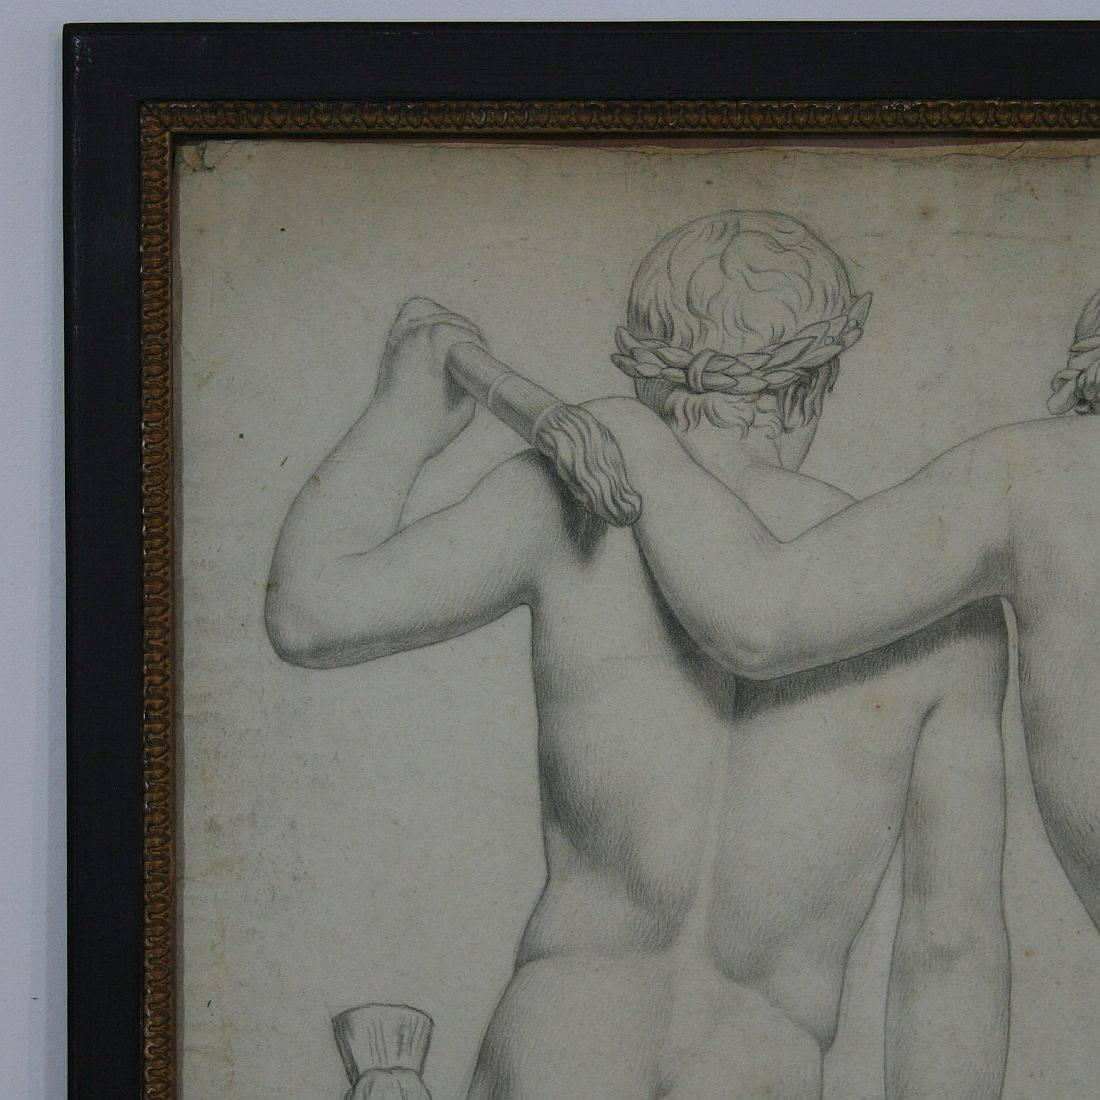 Beautiful drawing of male nudes. 
France, circa 1800-1850. Good condition.